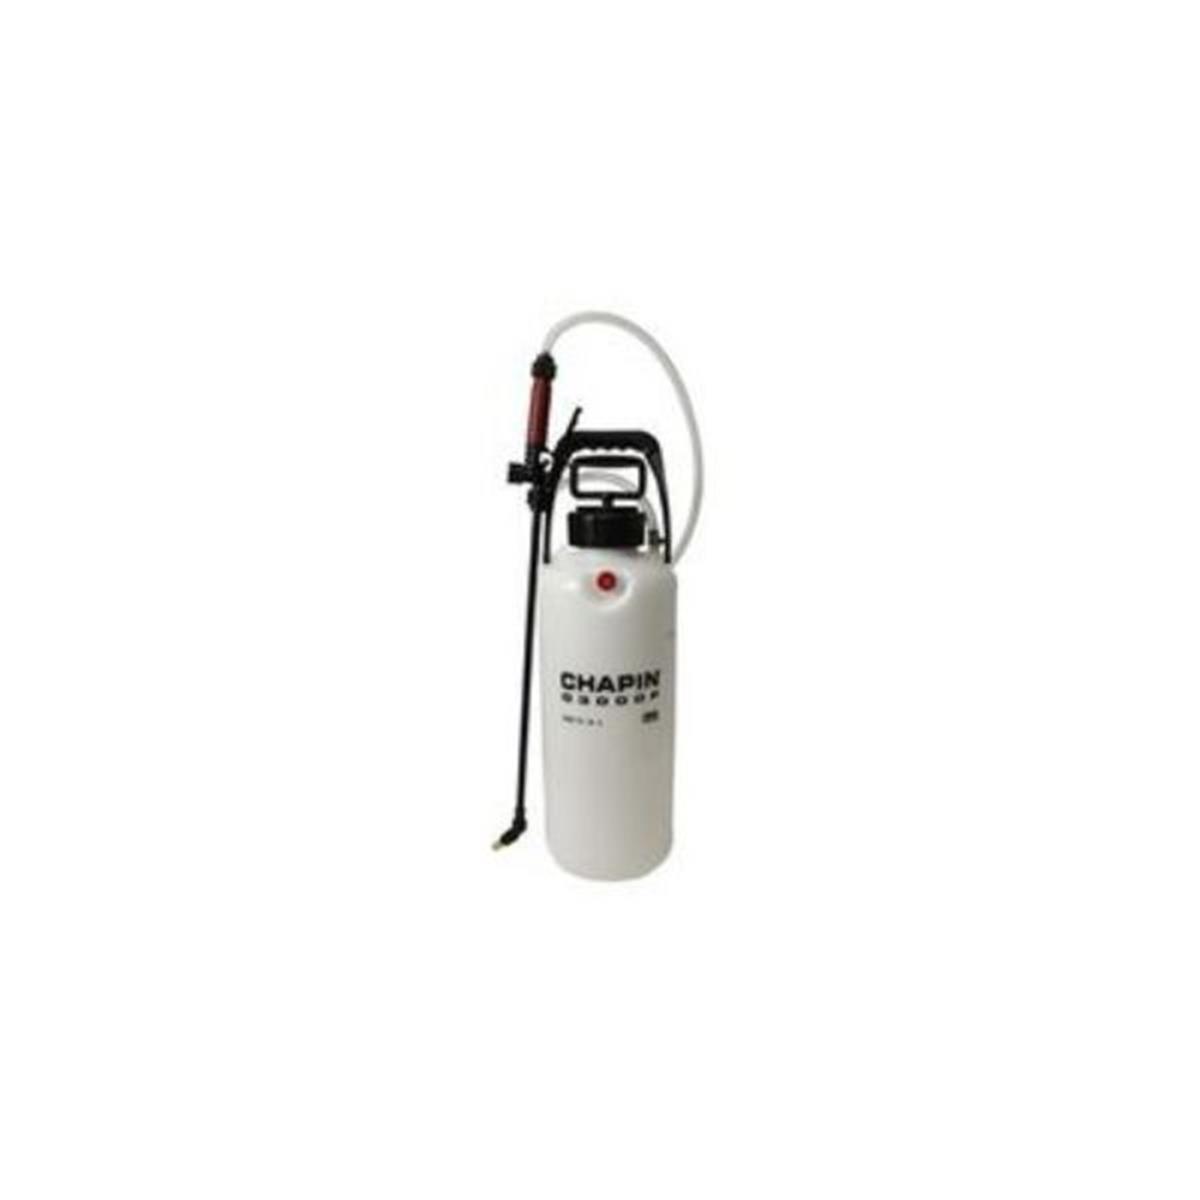 Picture of Chapin G3000P 3 gal Poly Tank Handle Sprayer